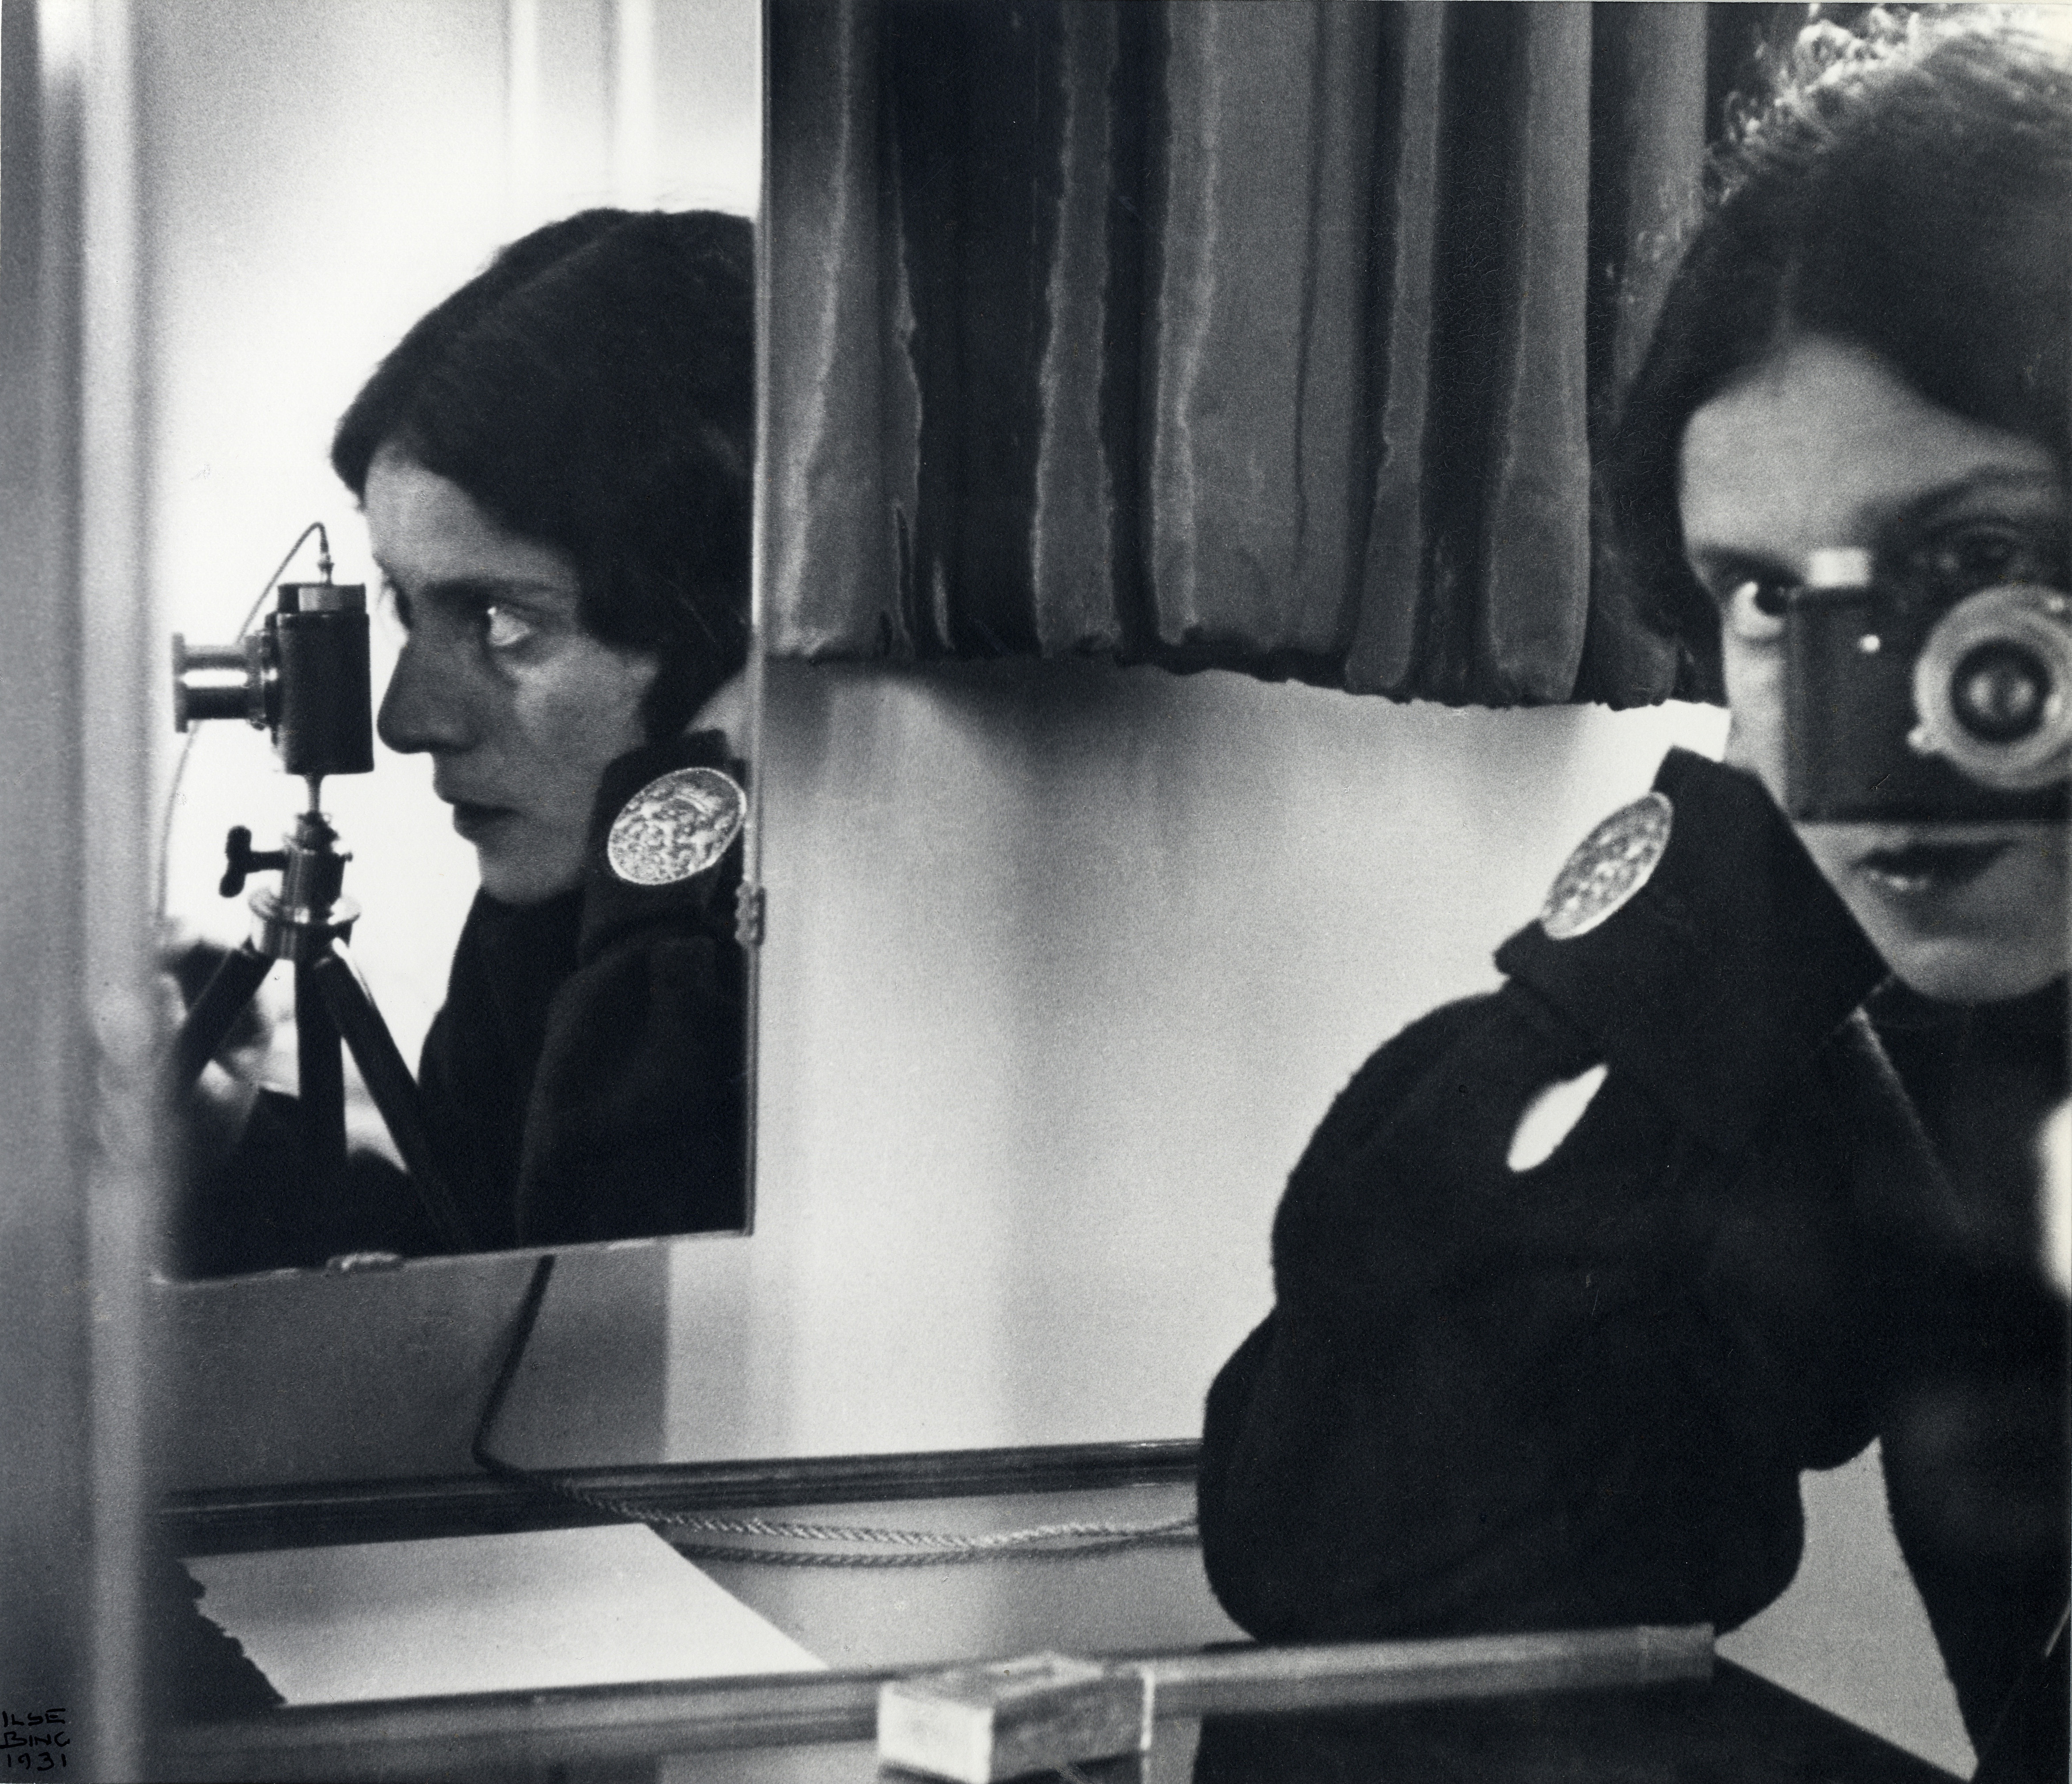 Many artists have done self-portraits in mirrors, but Ilse Bing in her doubly mirrored 'Self-Portrait with Leica' from 1931. (photo print, collection of Michael Mattis and Judith Hochberg)